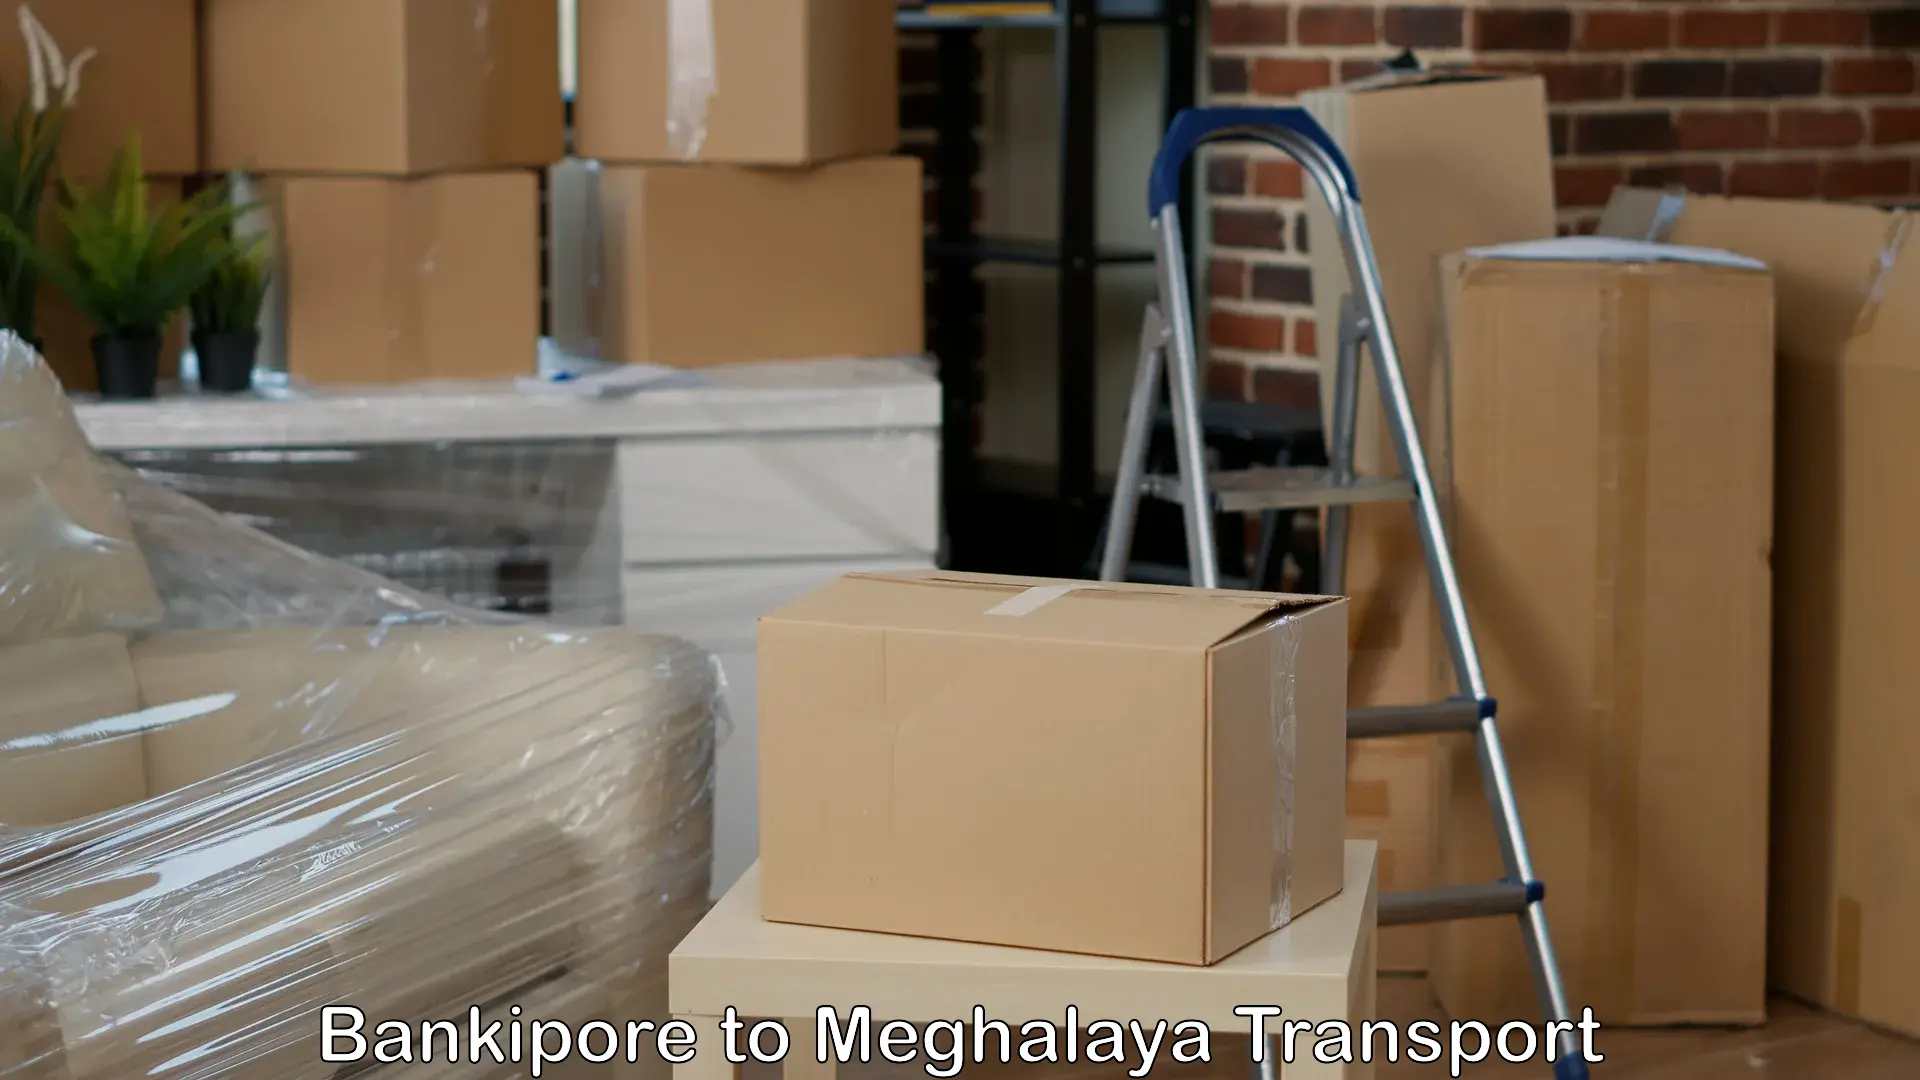 Goods delivery service Bankipore to Meghalaya